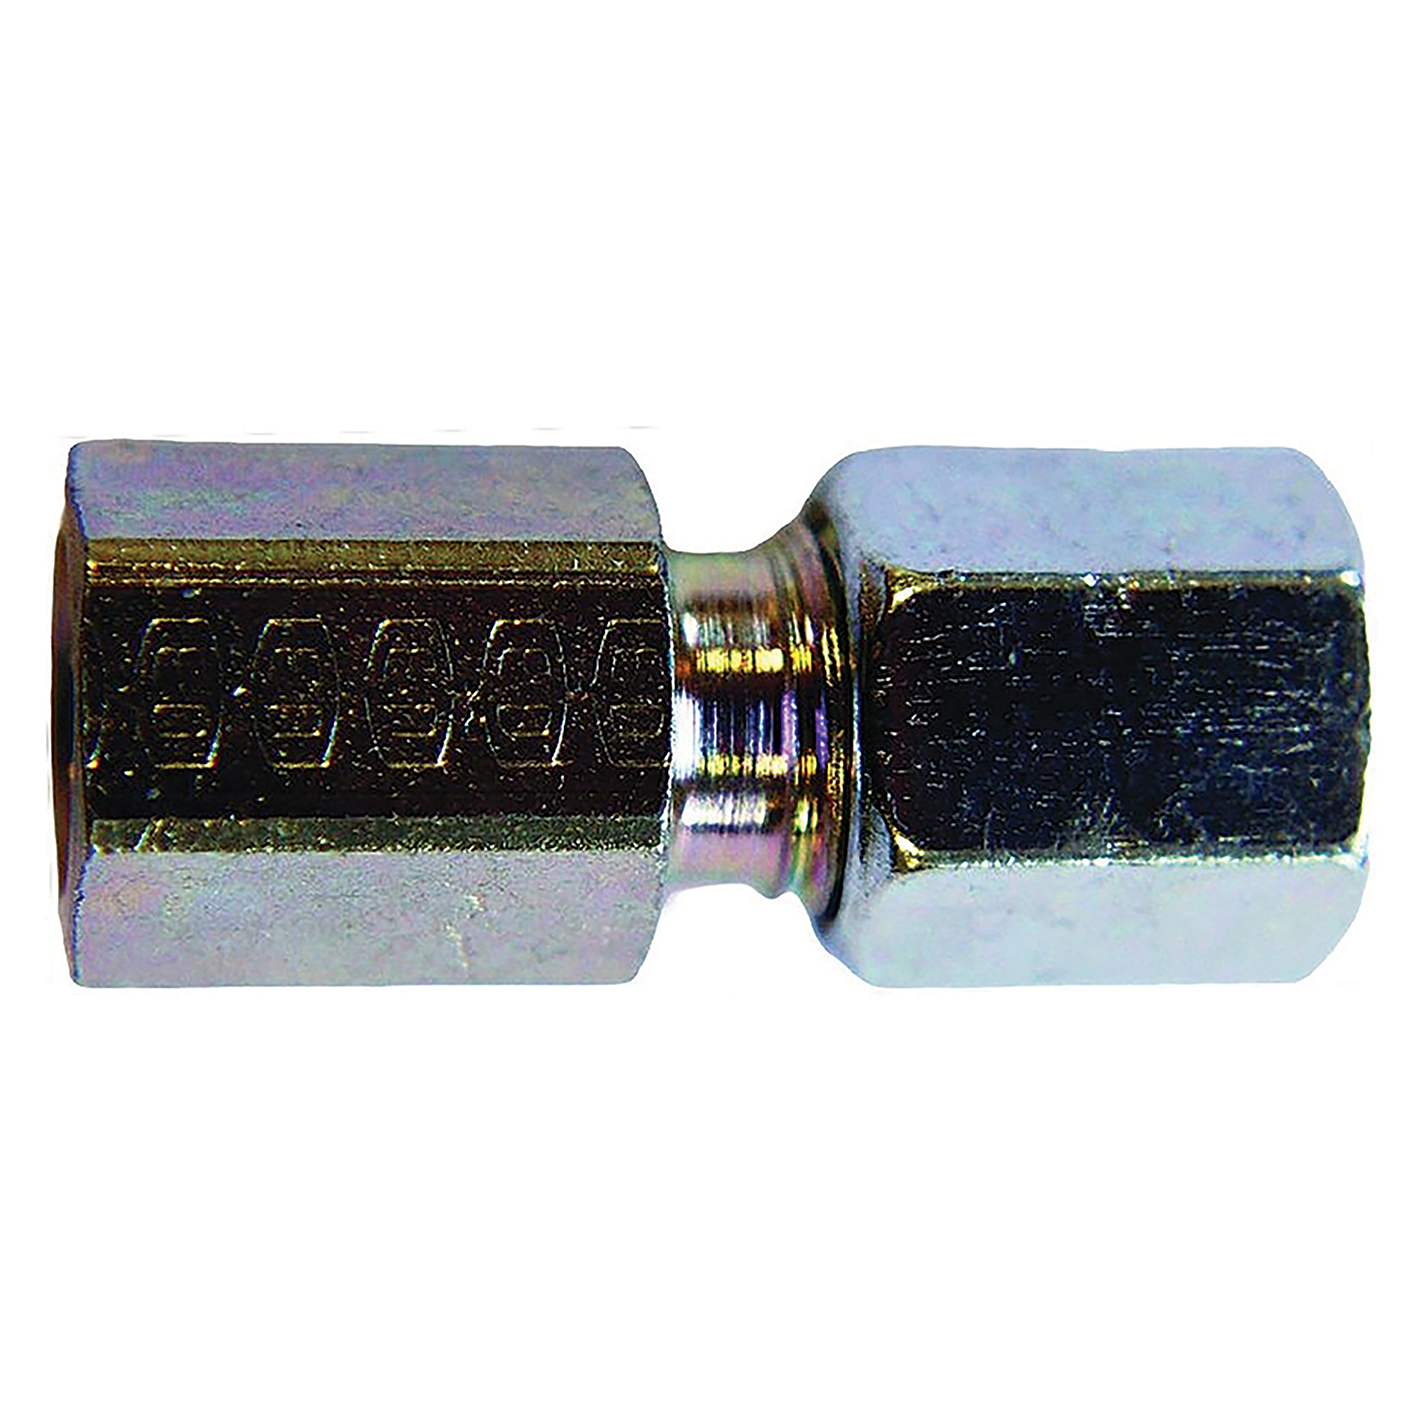 1/4" BSPP Female Female Connector 24° Cone End